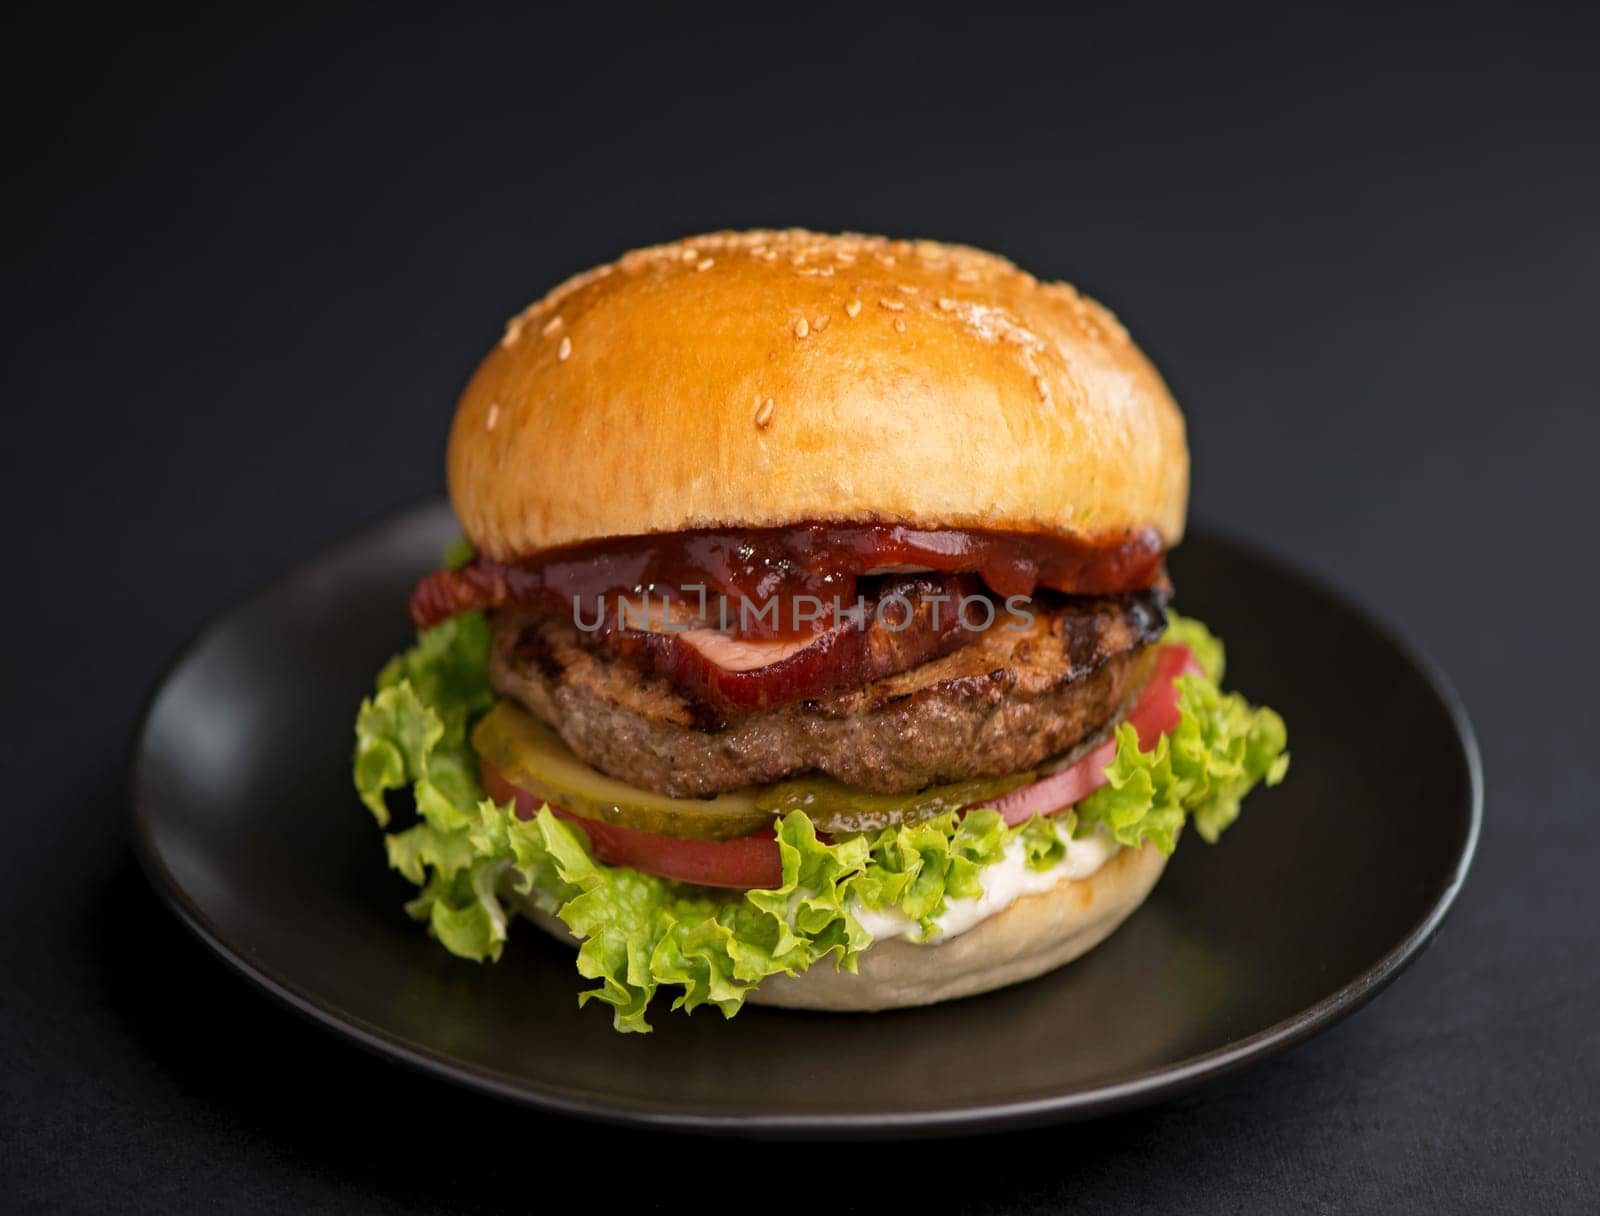 Big tasty burger with beef patty, lettuce, bacon and pickle on black background by aprilphoto